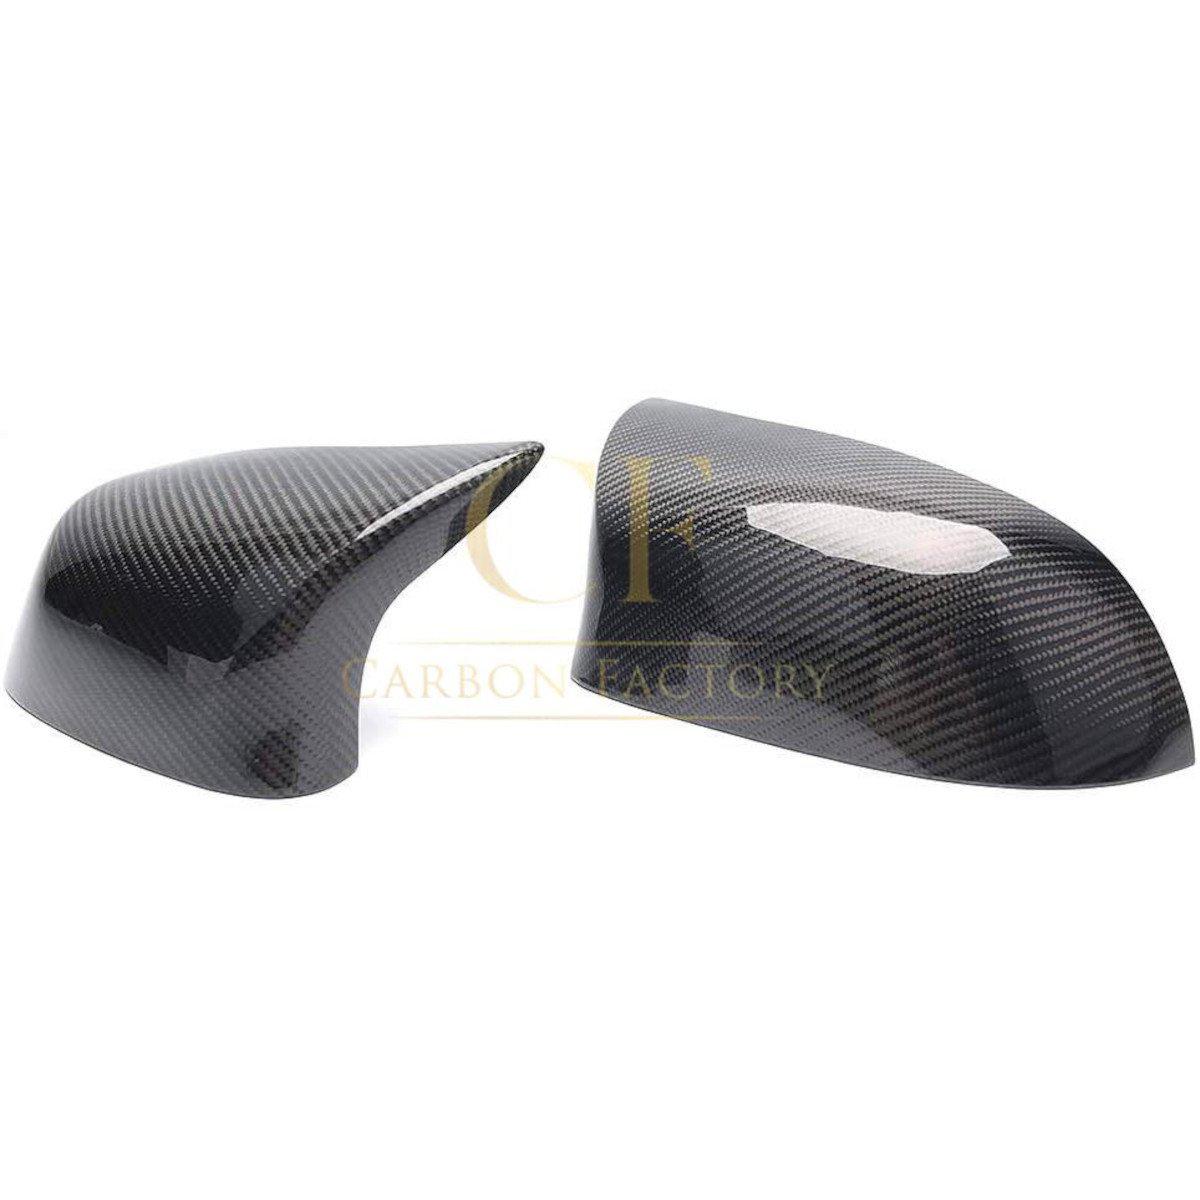 BMW F25 X3 F26 X4 F15 X5 F16 X6 M Performance Style Carbon Fibre Replacement Mirror Covers 14-18-Carbon Factory